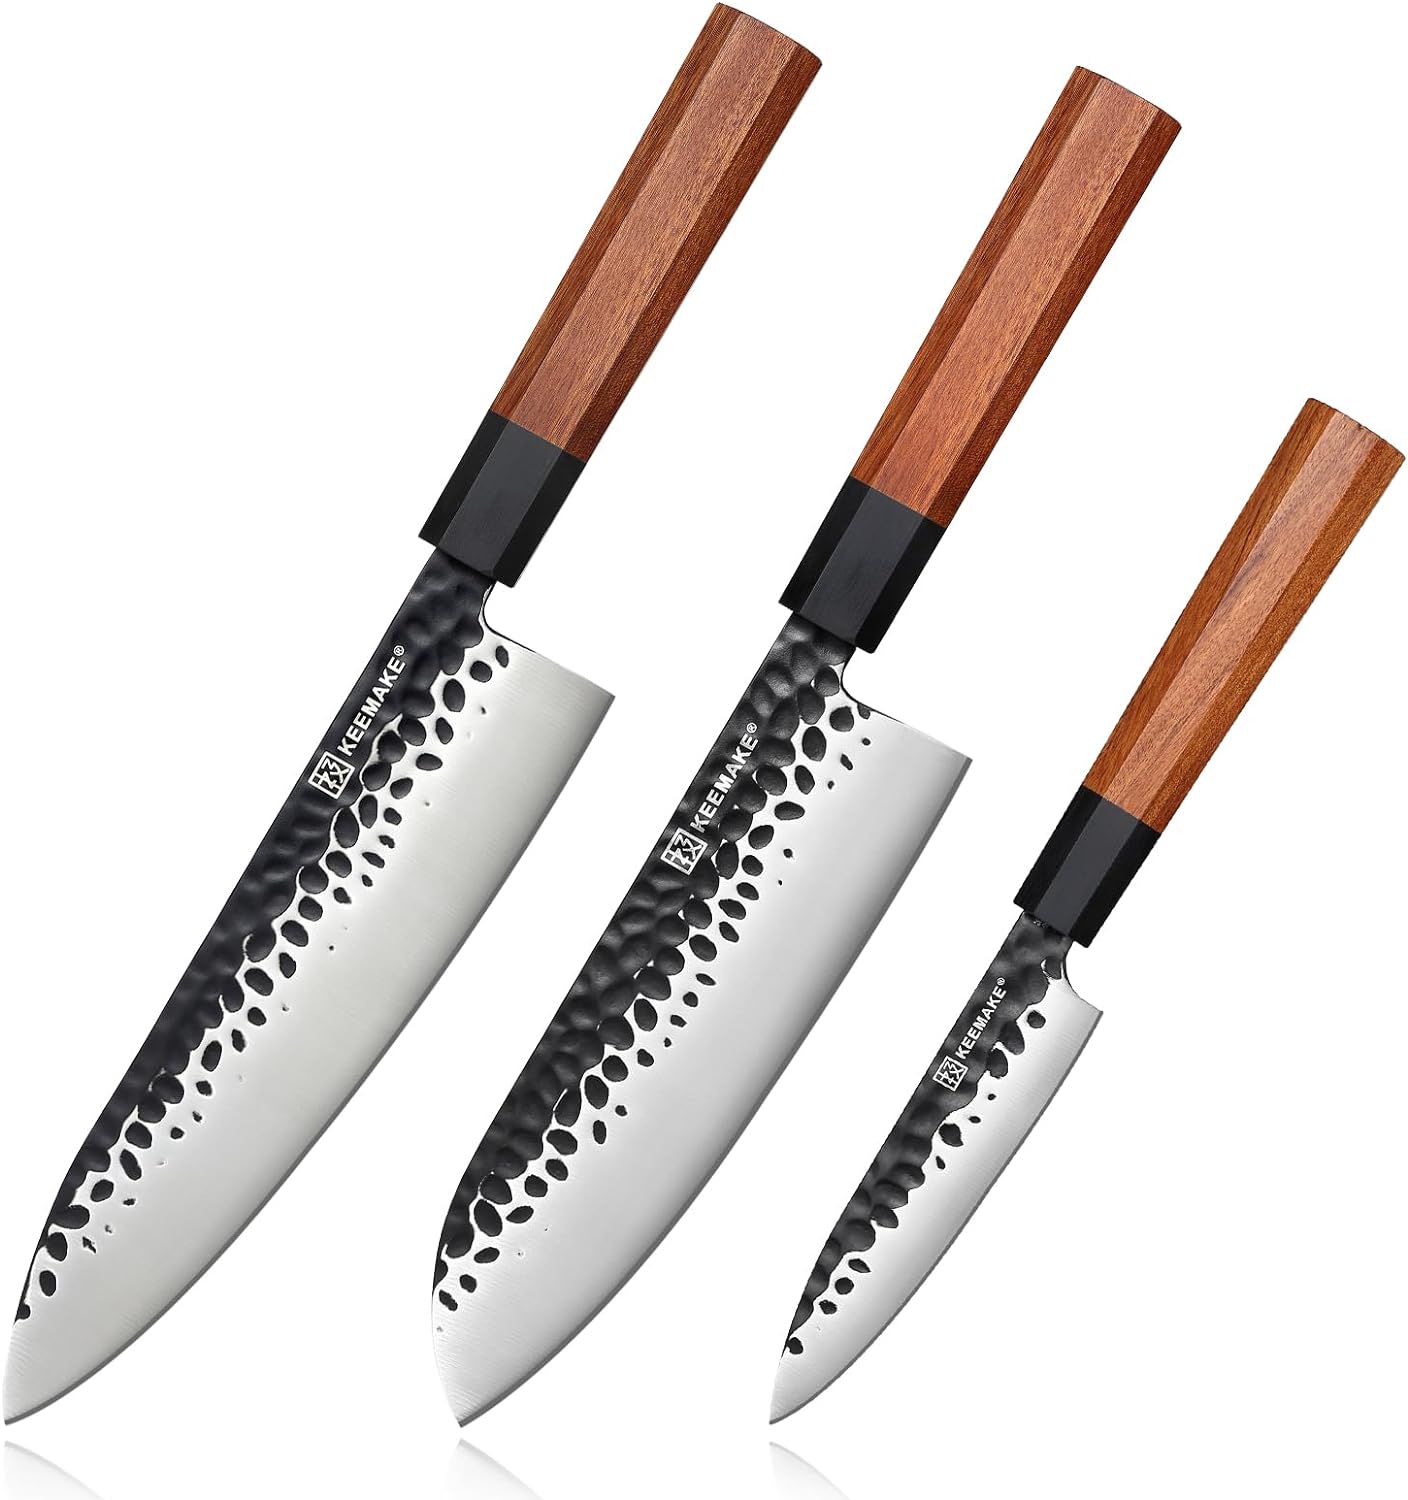 KEEMAKE Knife Set of 3pcs, Kitchen Knife Set with Japanese 440C Stainless Steel Blade Chef Knife Set with Octagon Rosewood Handle